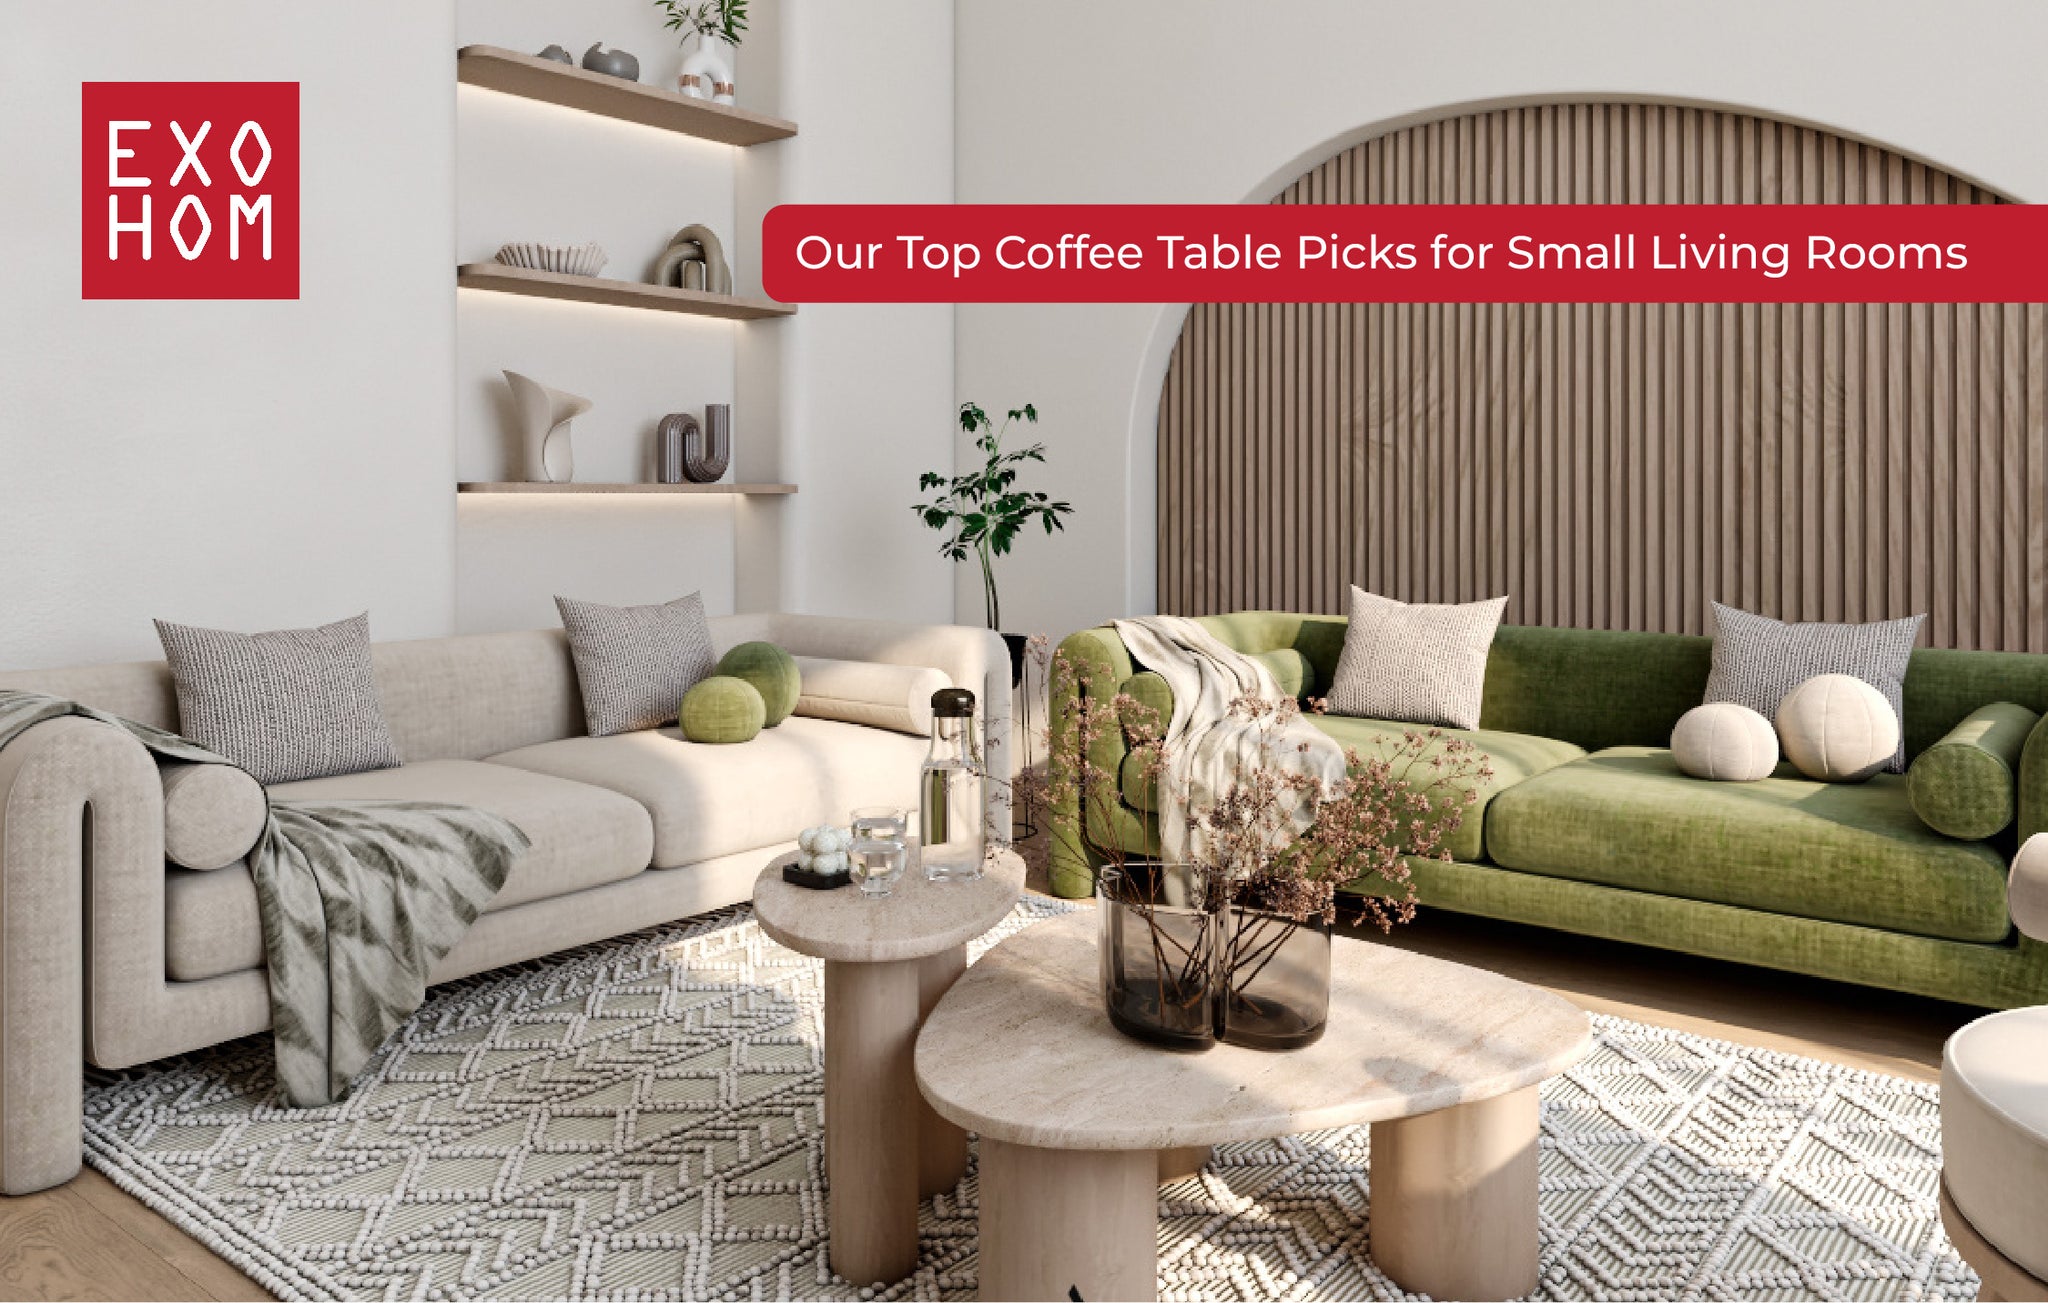 Our Top Coffee Table Picks for Small Living Rooms